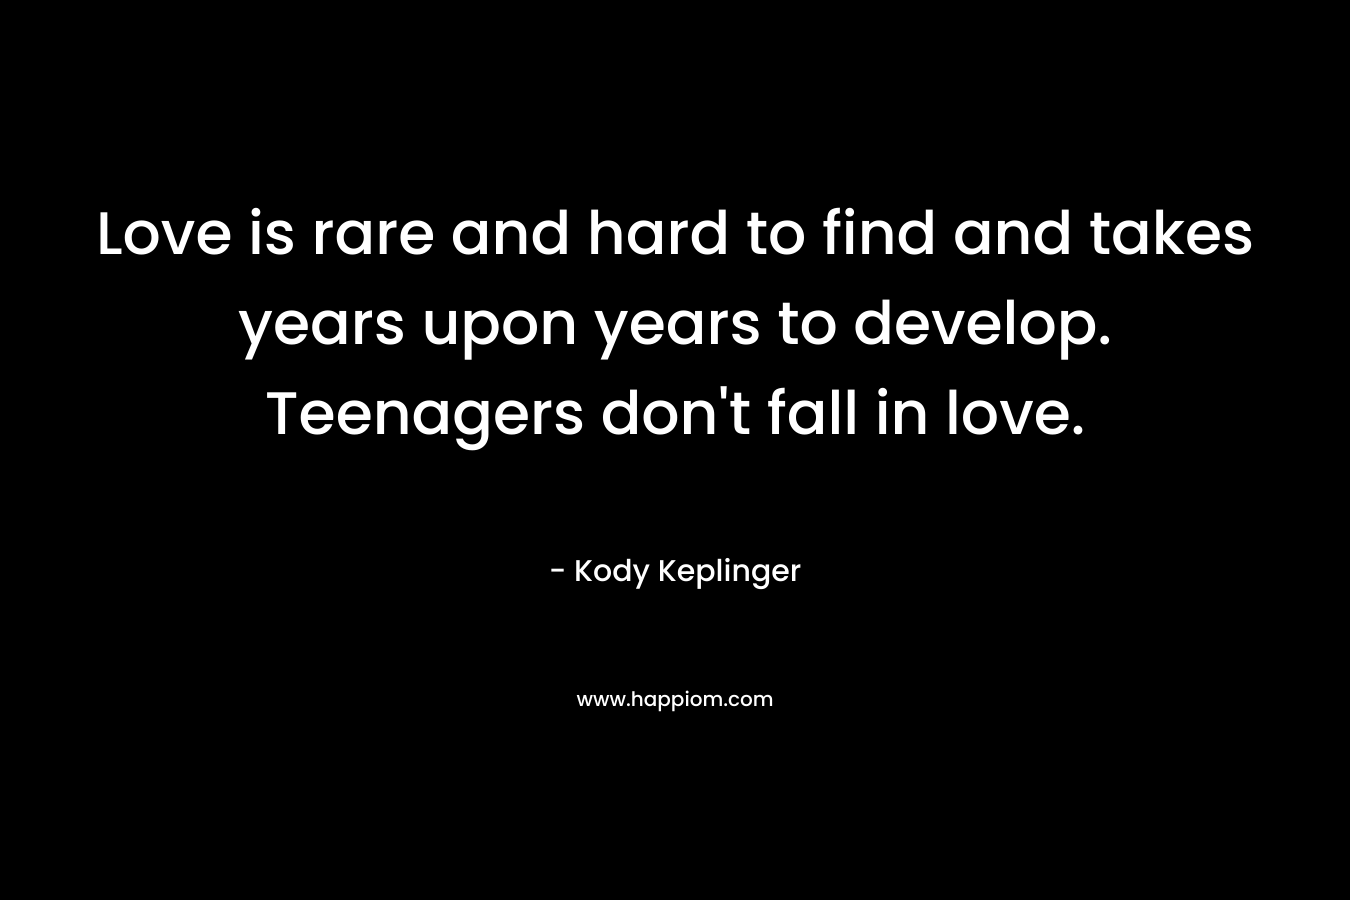 Love is rare and hard to find and takes years upon years to develop. Teenagers don't fall in love.